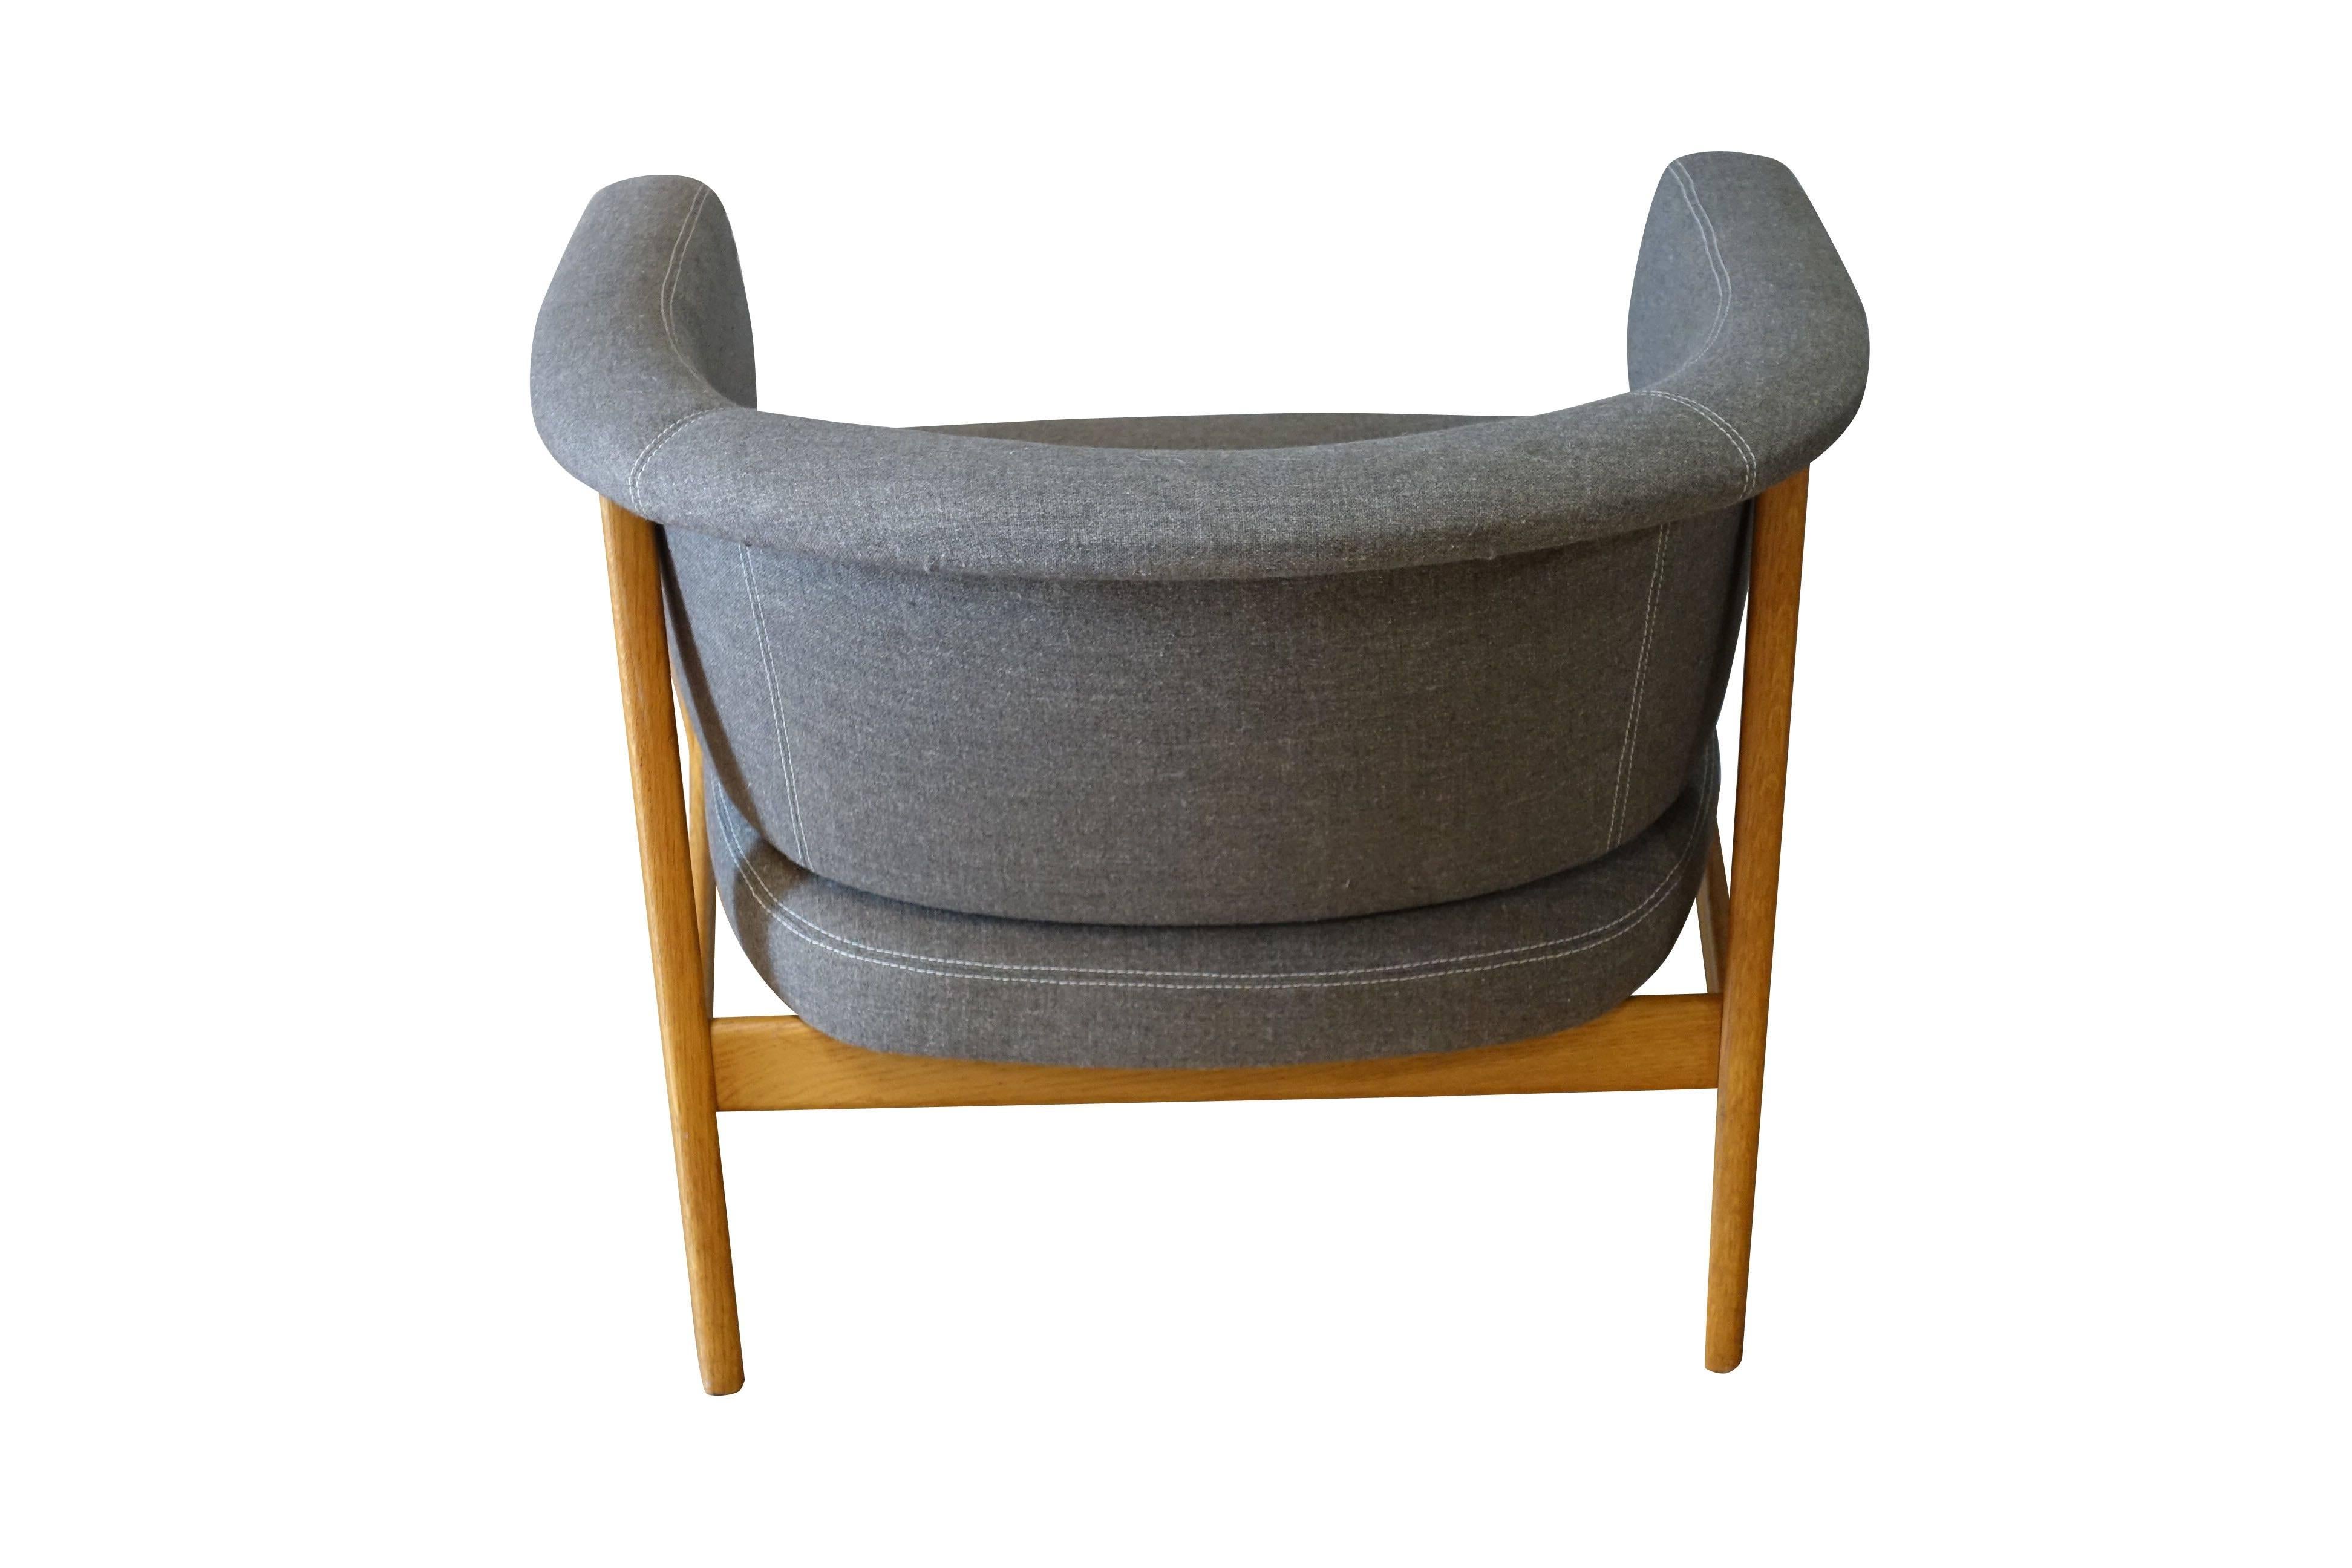 20th Century Swedish Upholstered Pair of Side Chairs, Mid-Century